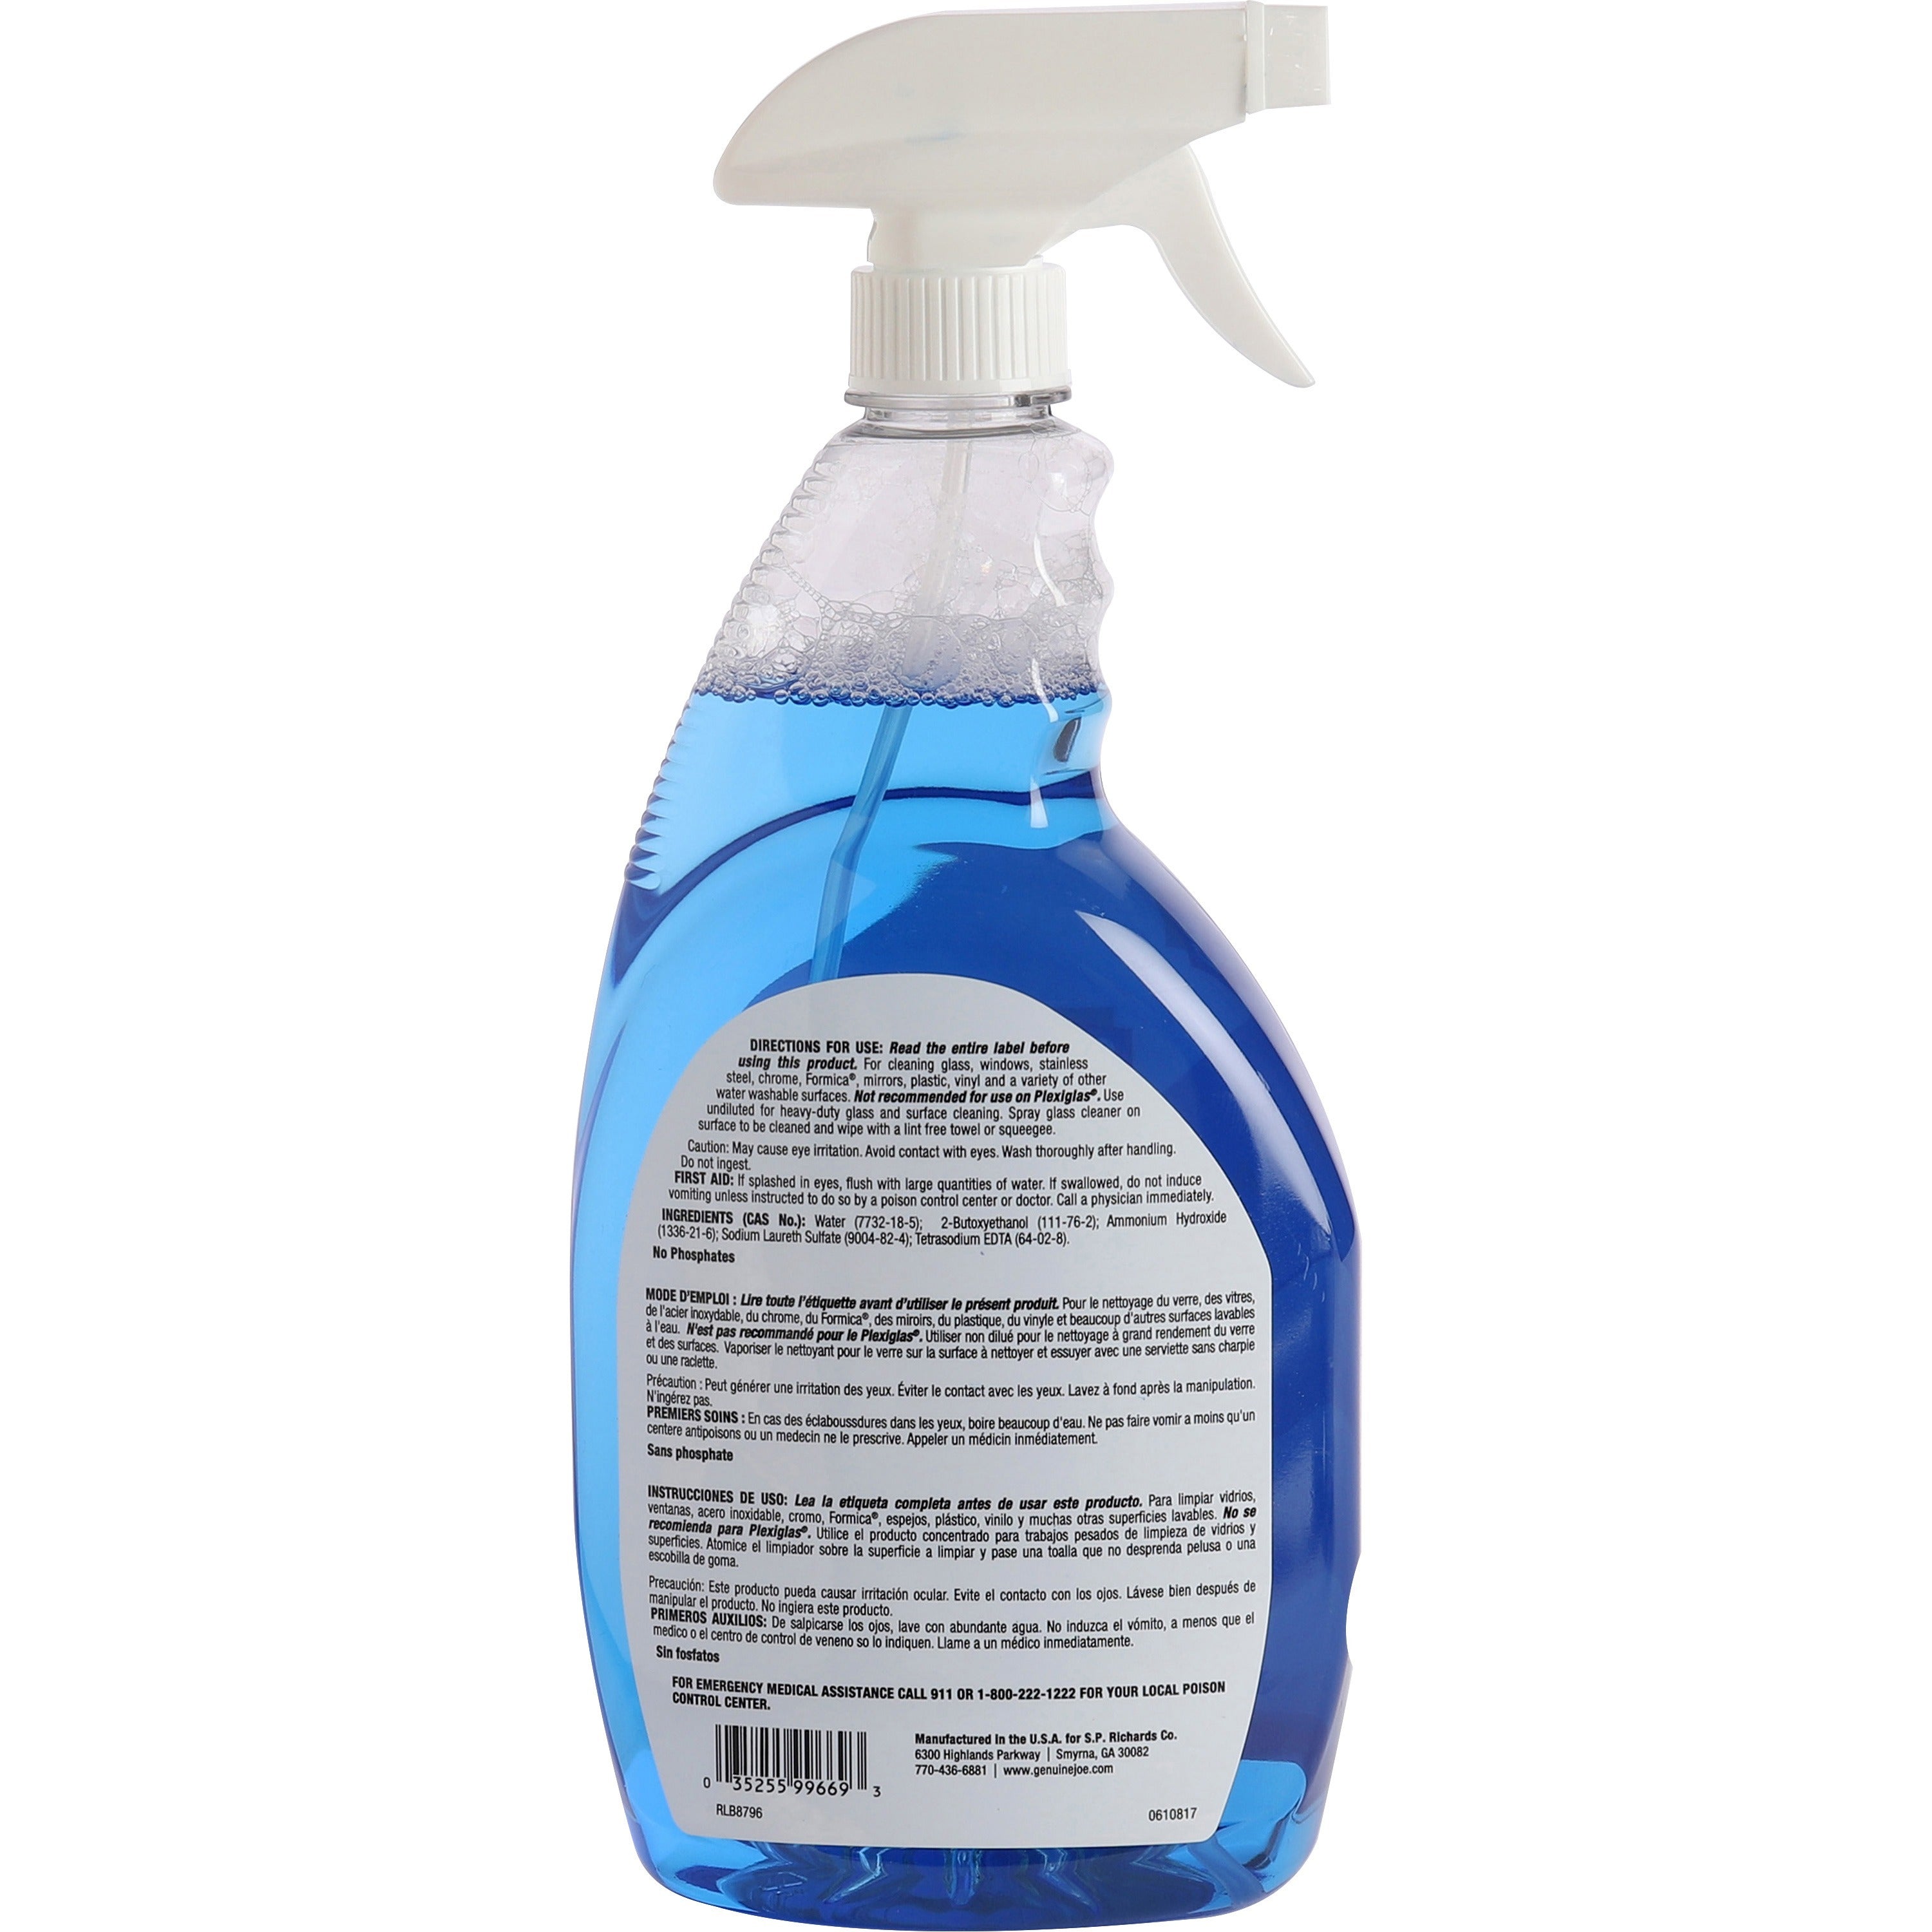 Genuine Joe Ammoniated Glass Cleaner - For Hard Surface - Ready-To-Use - 32 fl oz (1 quart) - 1 Each - Lint-free, Heavy Duty, Easy to Use - Blue - 3